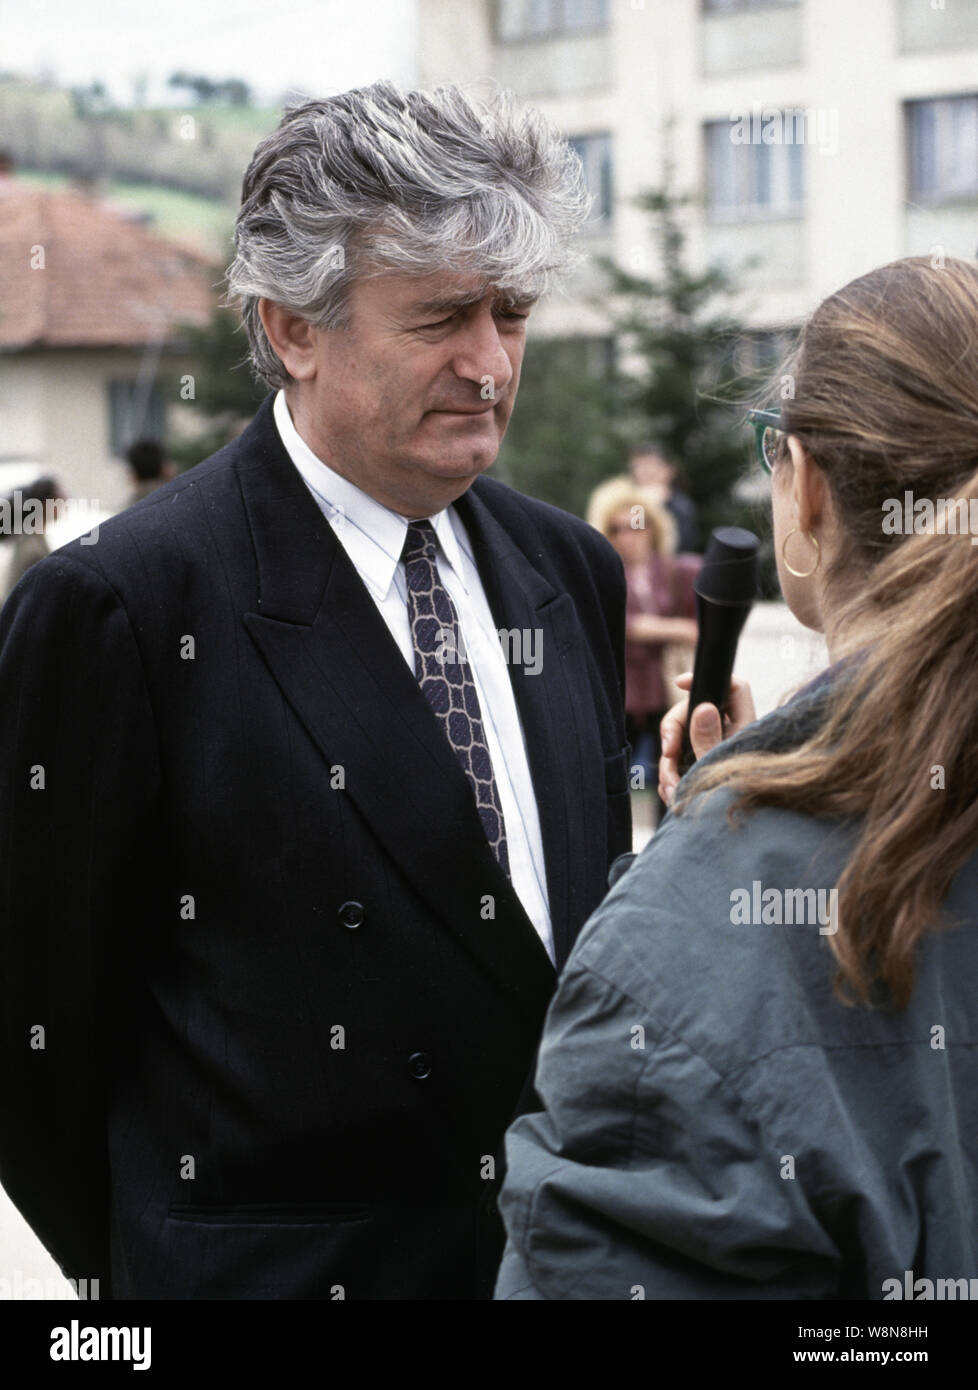 6th May 1993 During the war in central Bosnia: Italian television interviews the Bosnian Serb leader, Dr. Radovan Karadžić, outside the SRT building (Republika Srpska Television) in Pale. The National Assembly of Republika Srpska had been meeting to decide whether or not to accept the Vance-Owen Peace Plan. Stock Photo